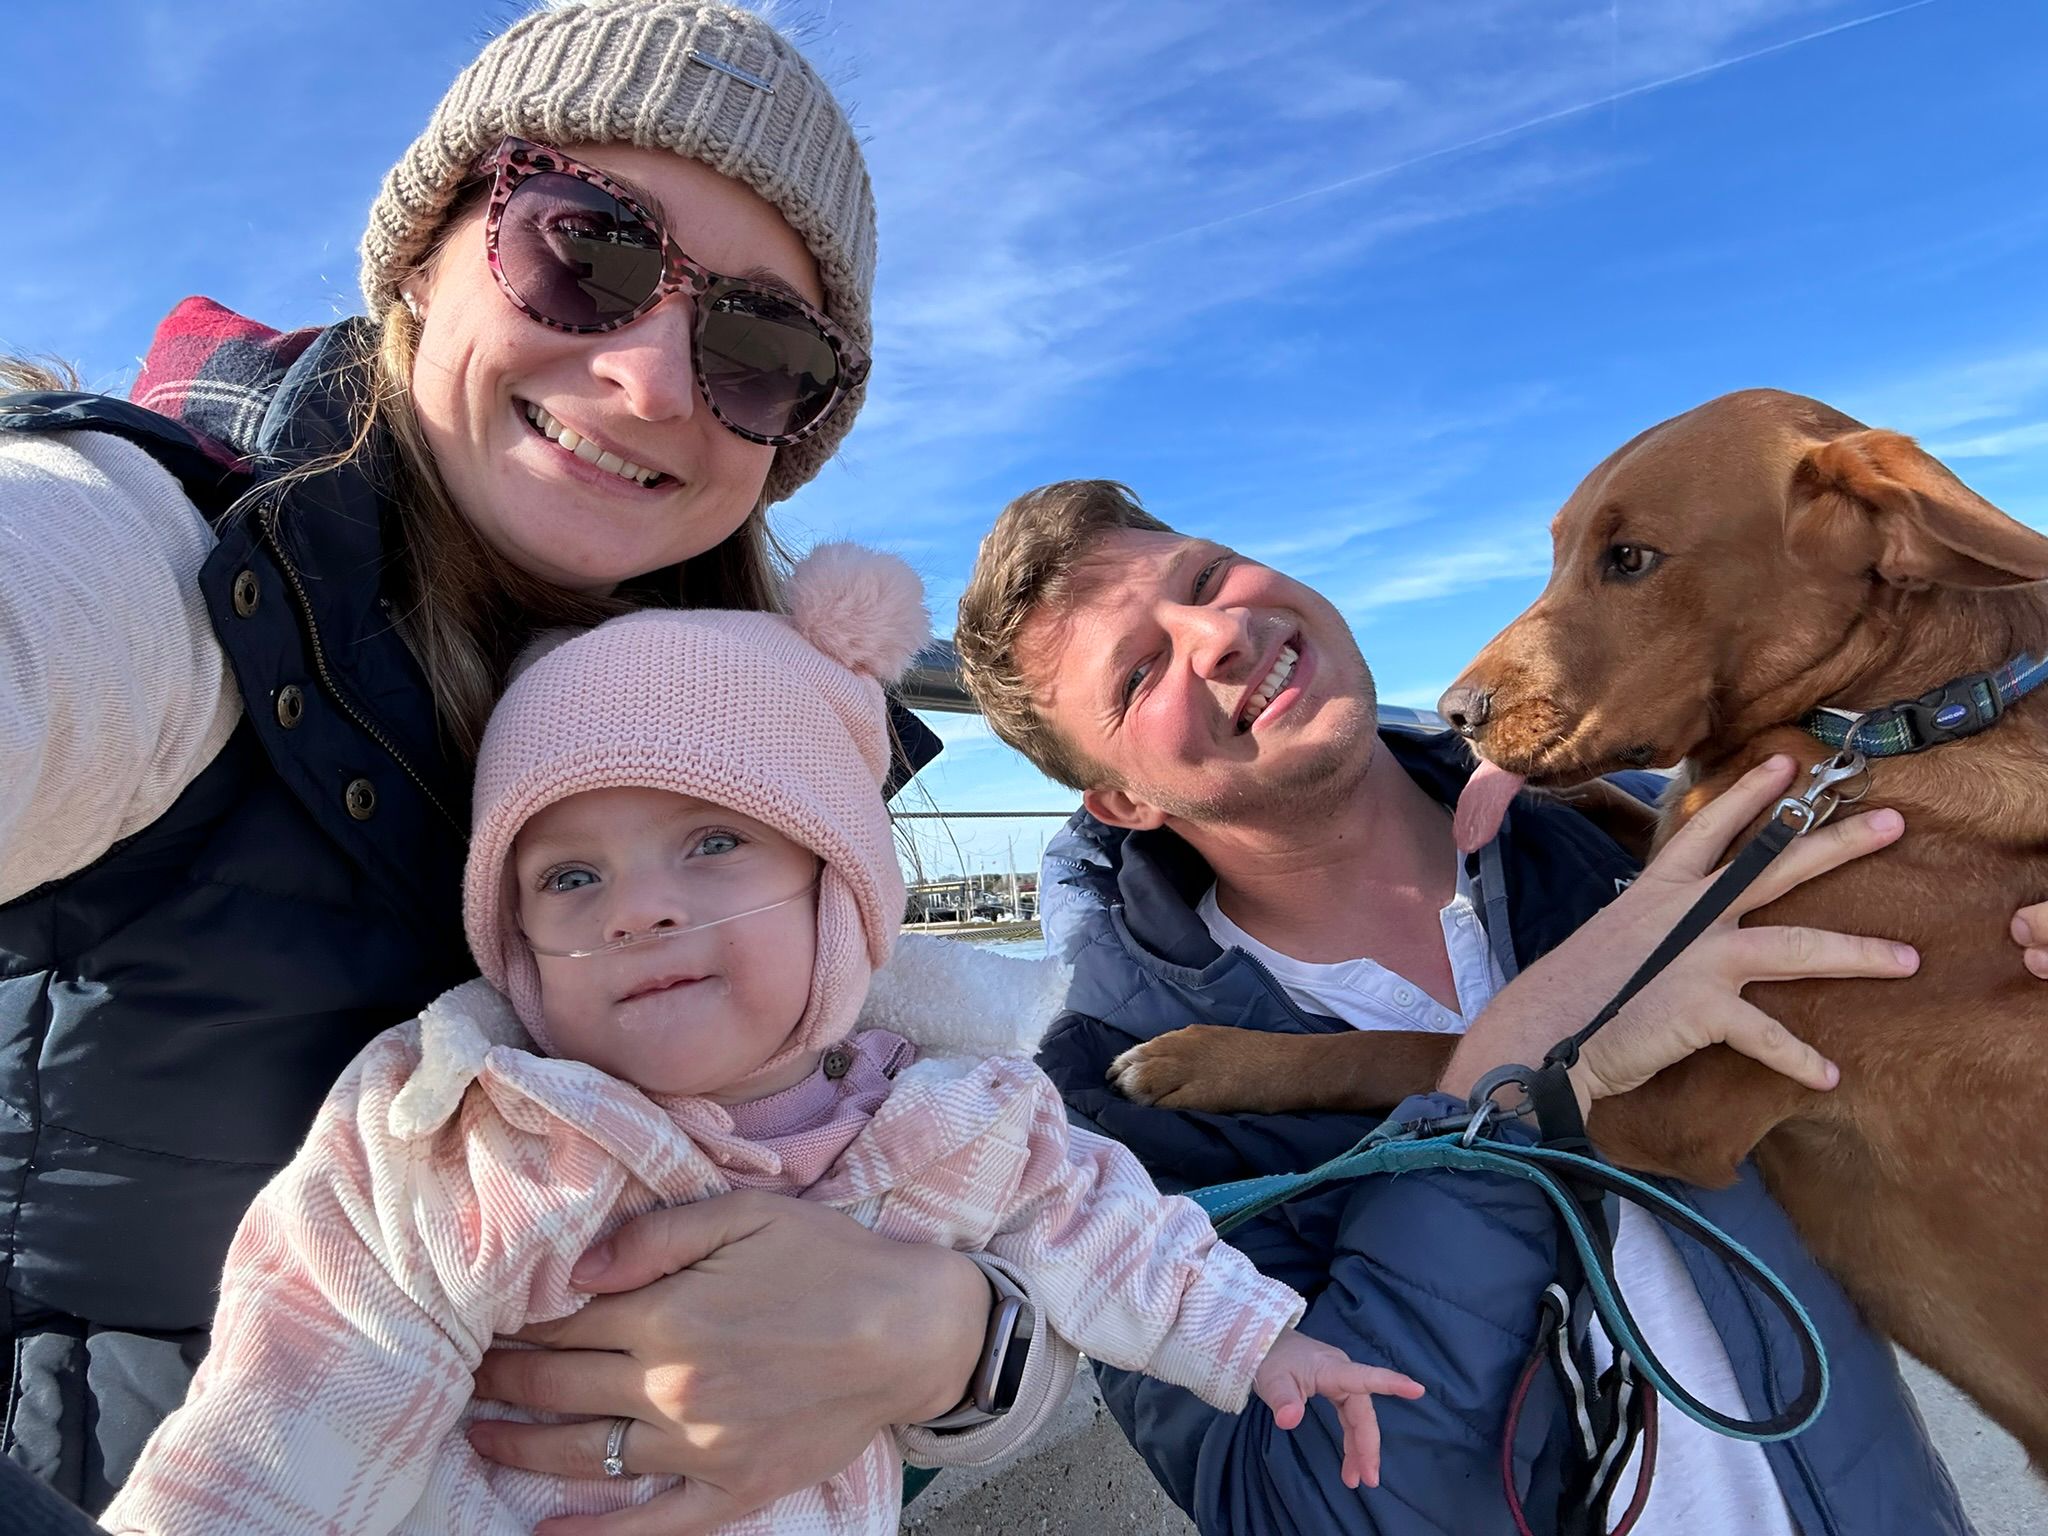 A family - mother, father, young daughter and their dog - smile at the camera outside against a blue sky.